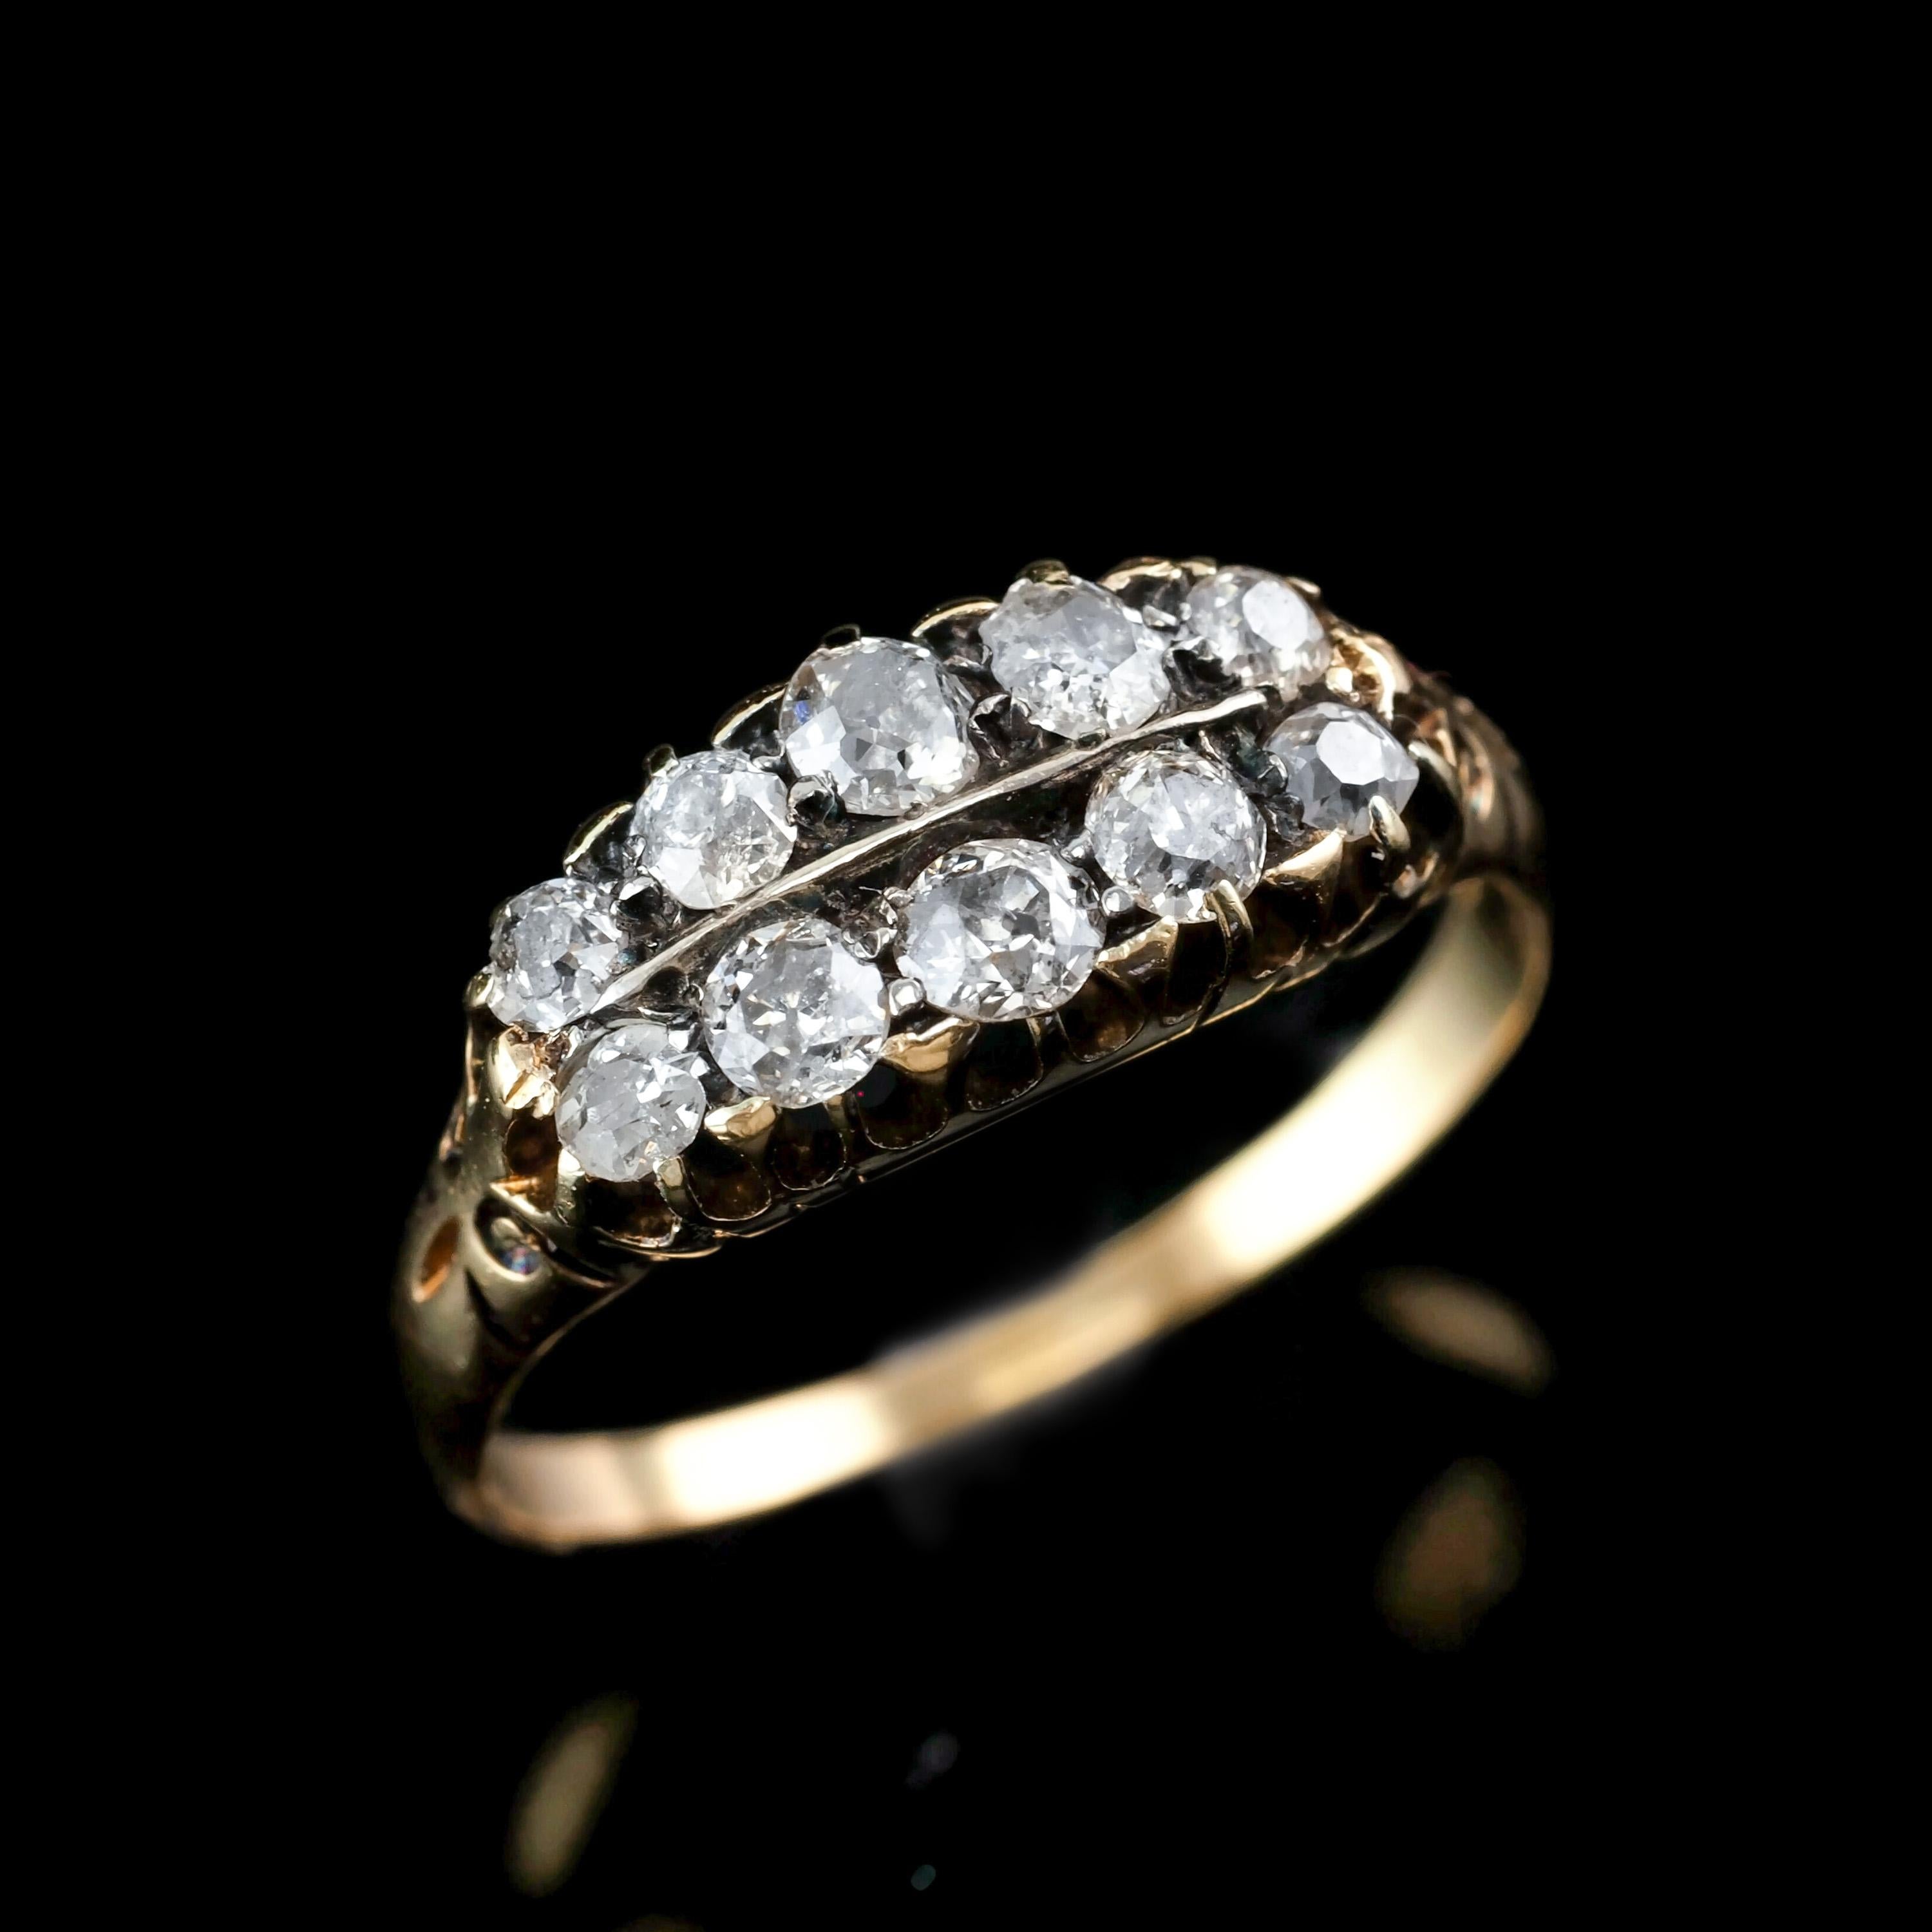 Antique Victorian 18K Gold Diamond Ring Old Cut - Boat Shaped c.1890 For Sale 7